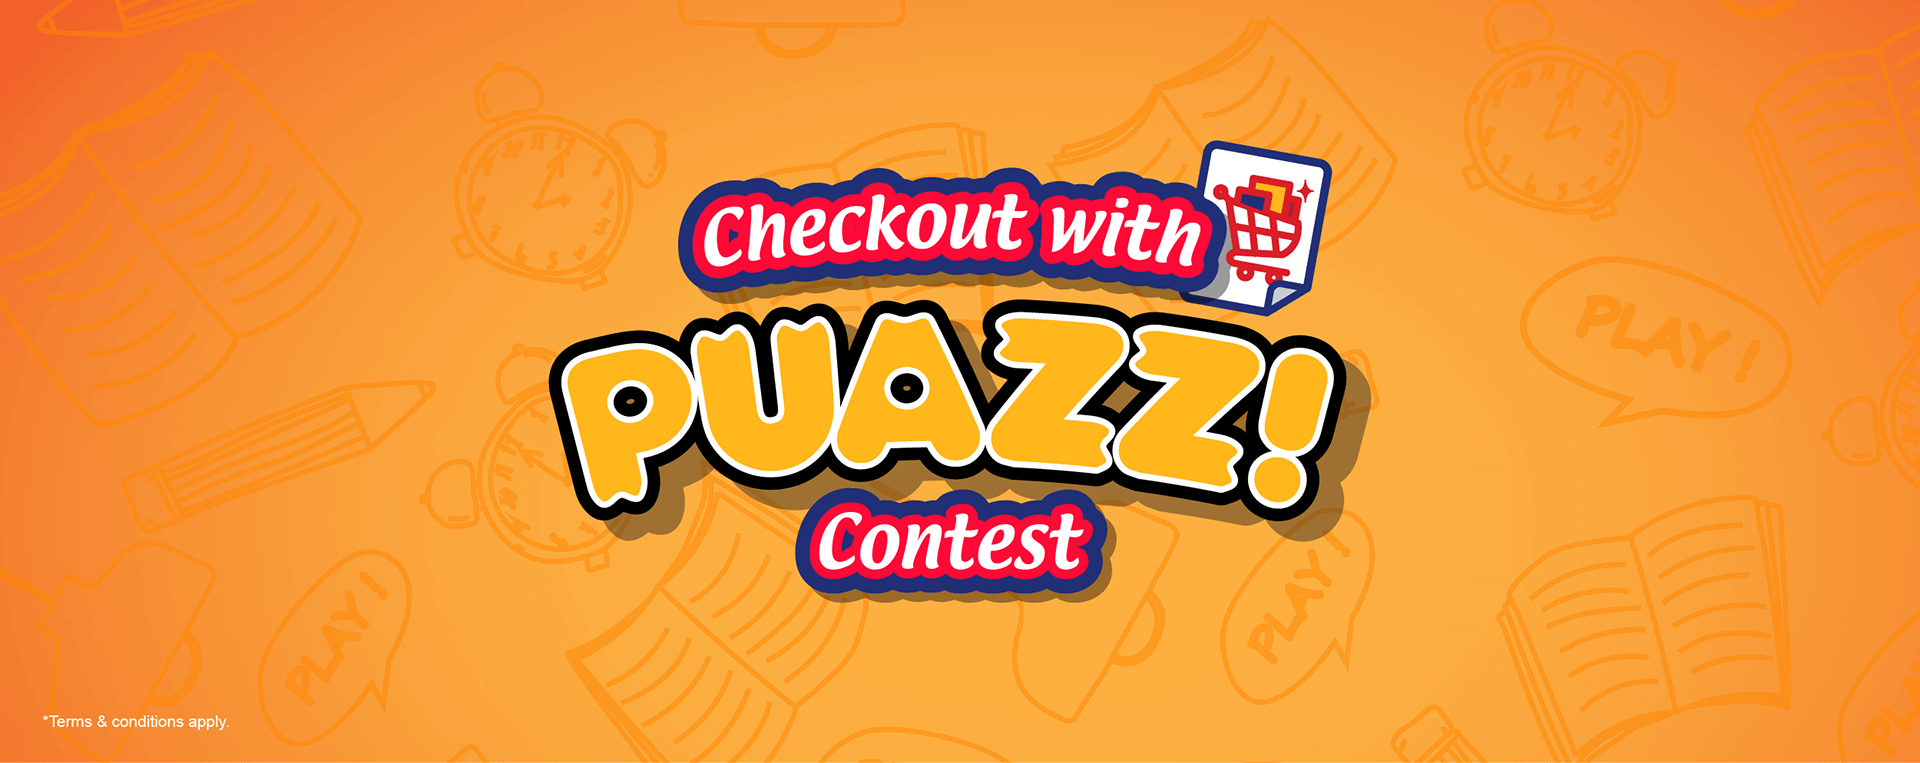 Checkout with PUAZZ! Contest